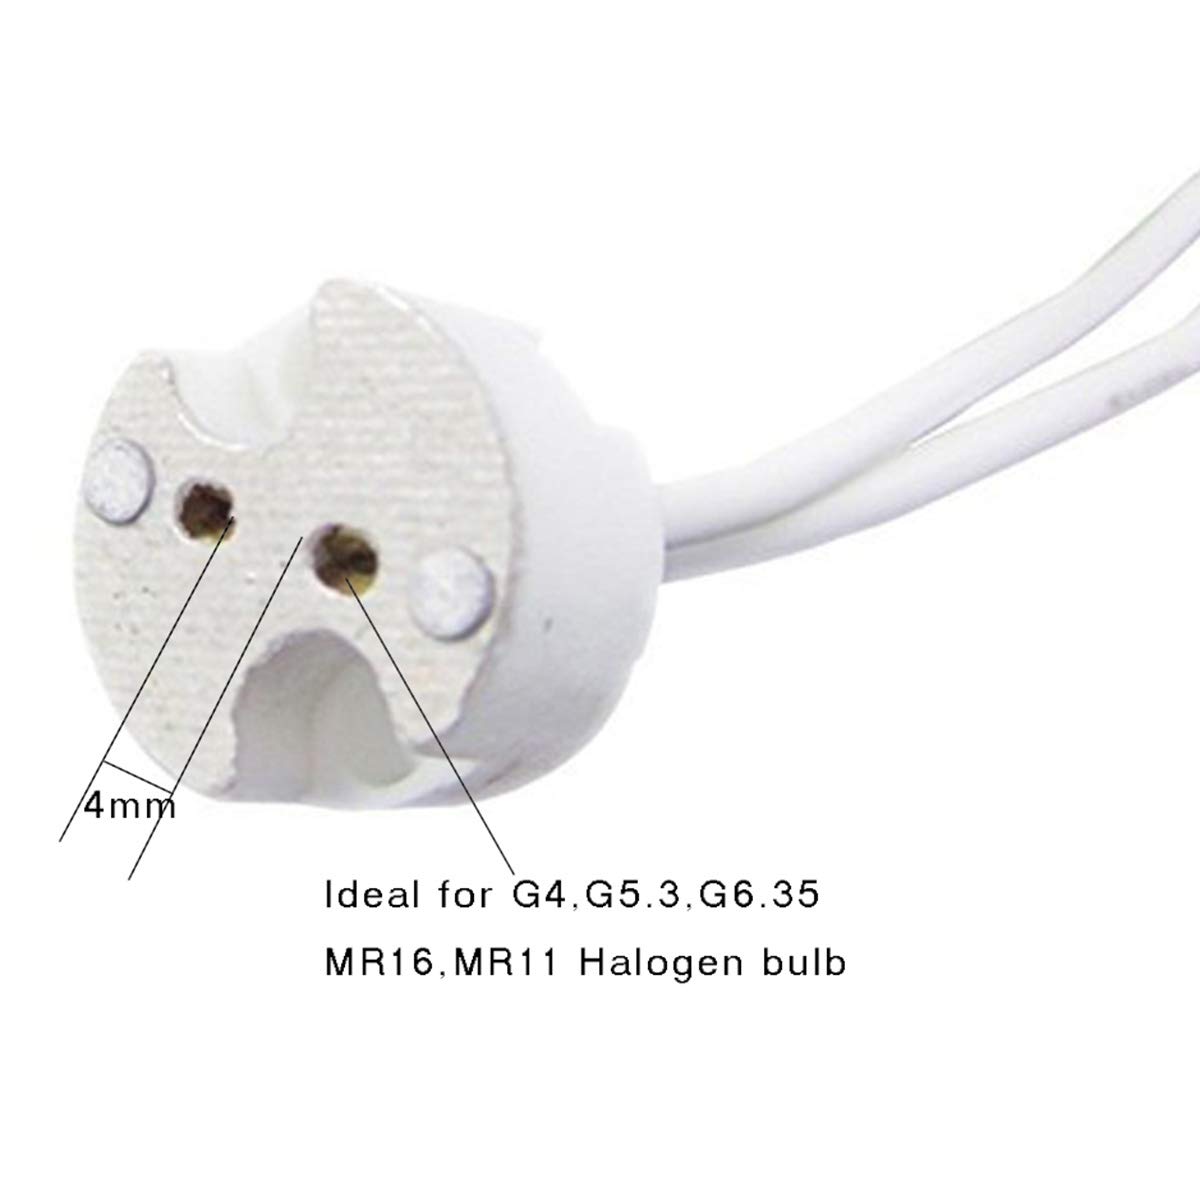 Zocalo G4 Mr16 12v Dicroica / Bipin Cable 15cm